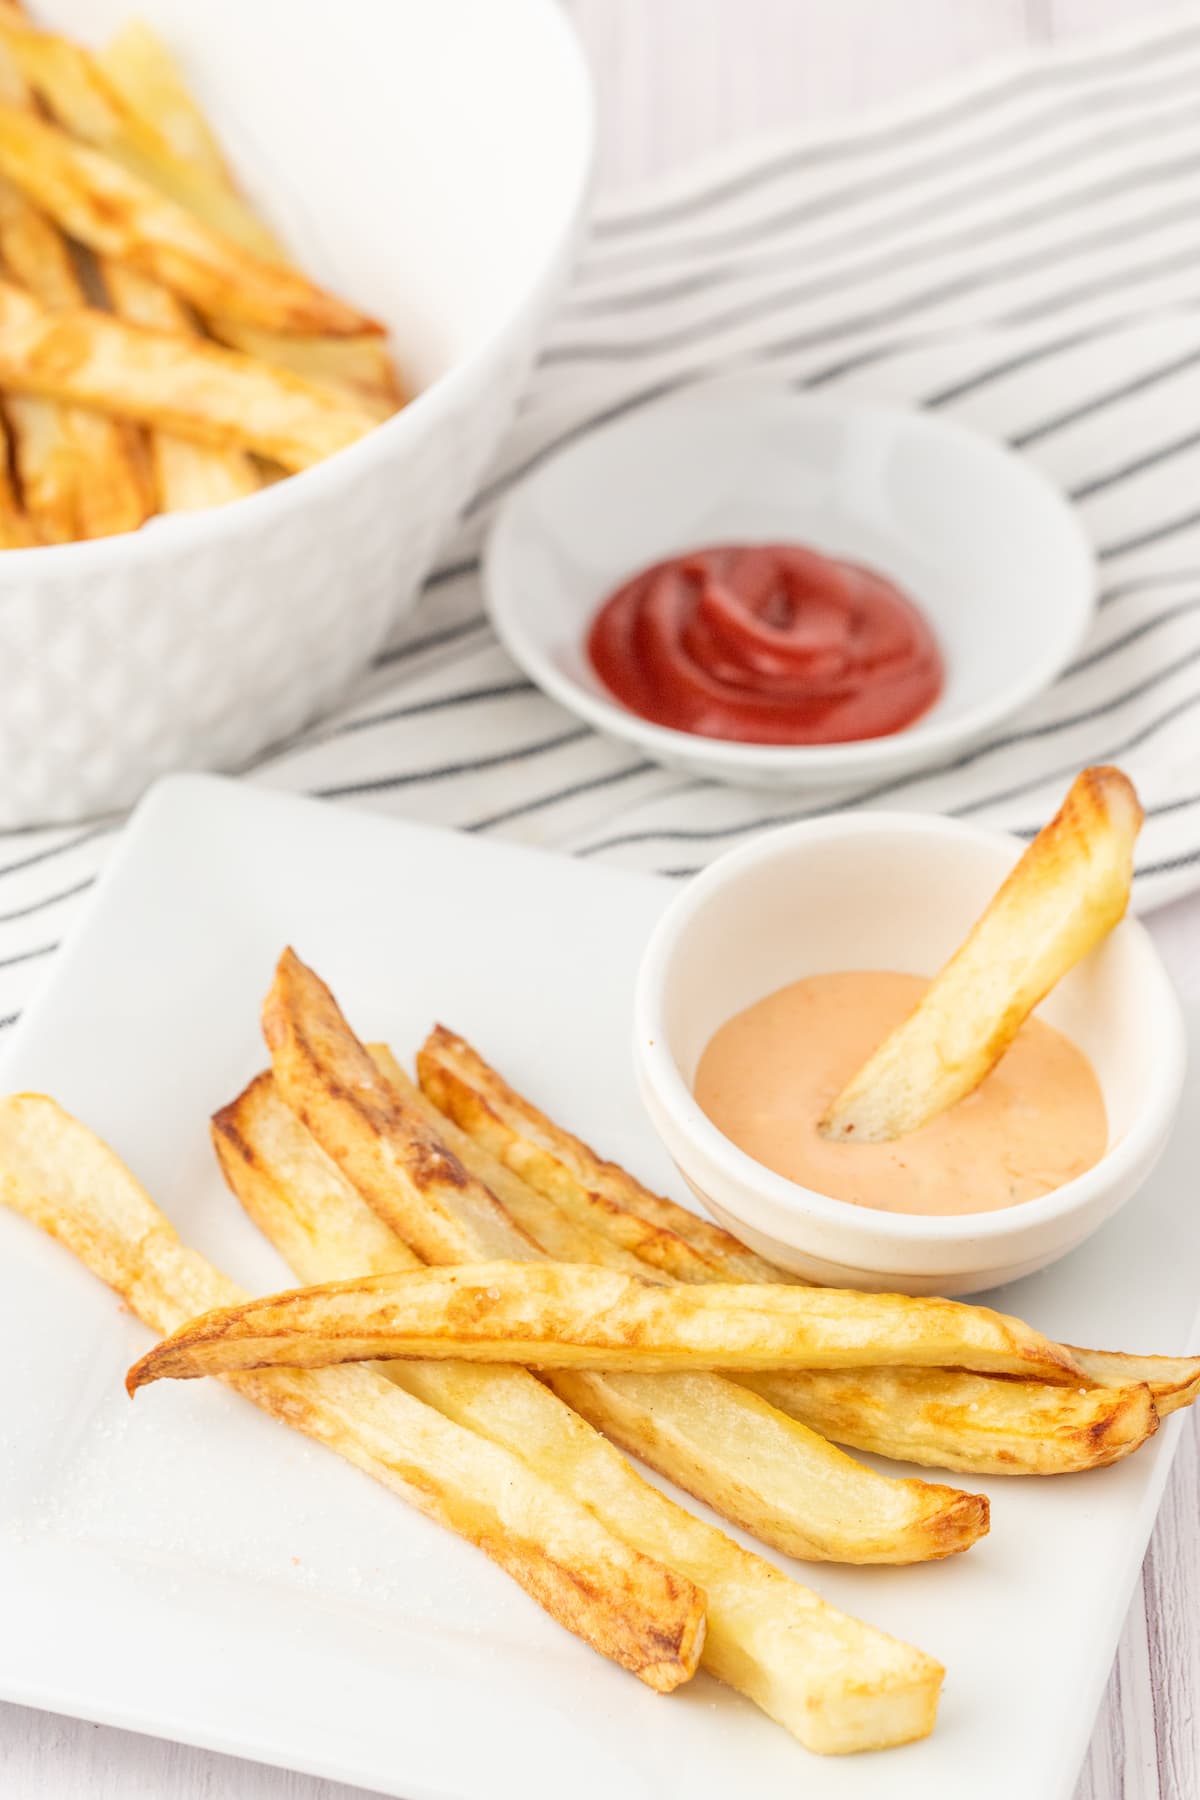 french fries on a plate next to a french fry being dipped into a small cup of fry sauce